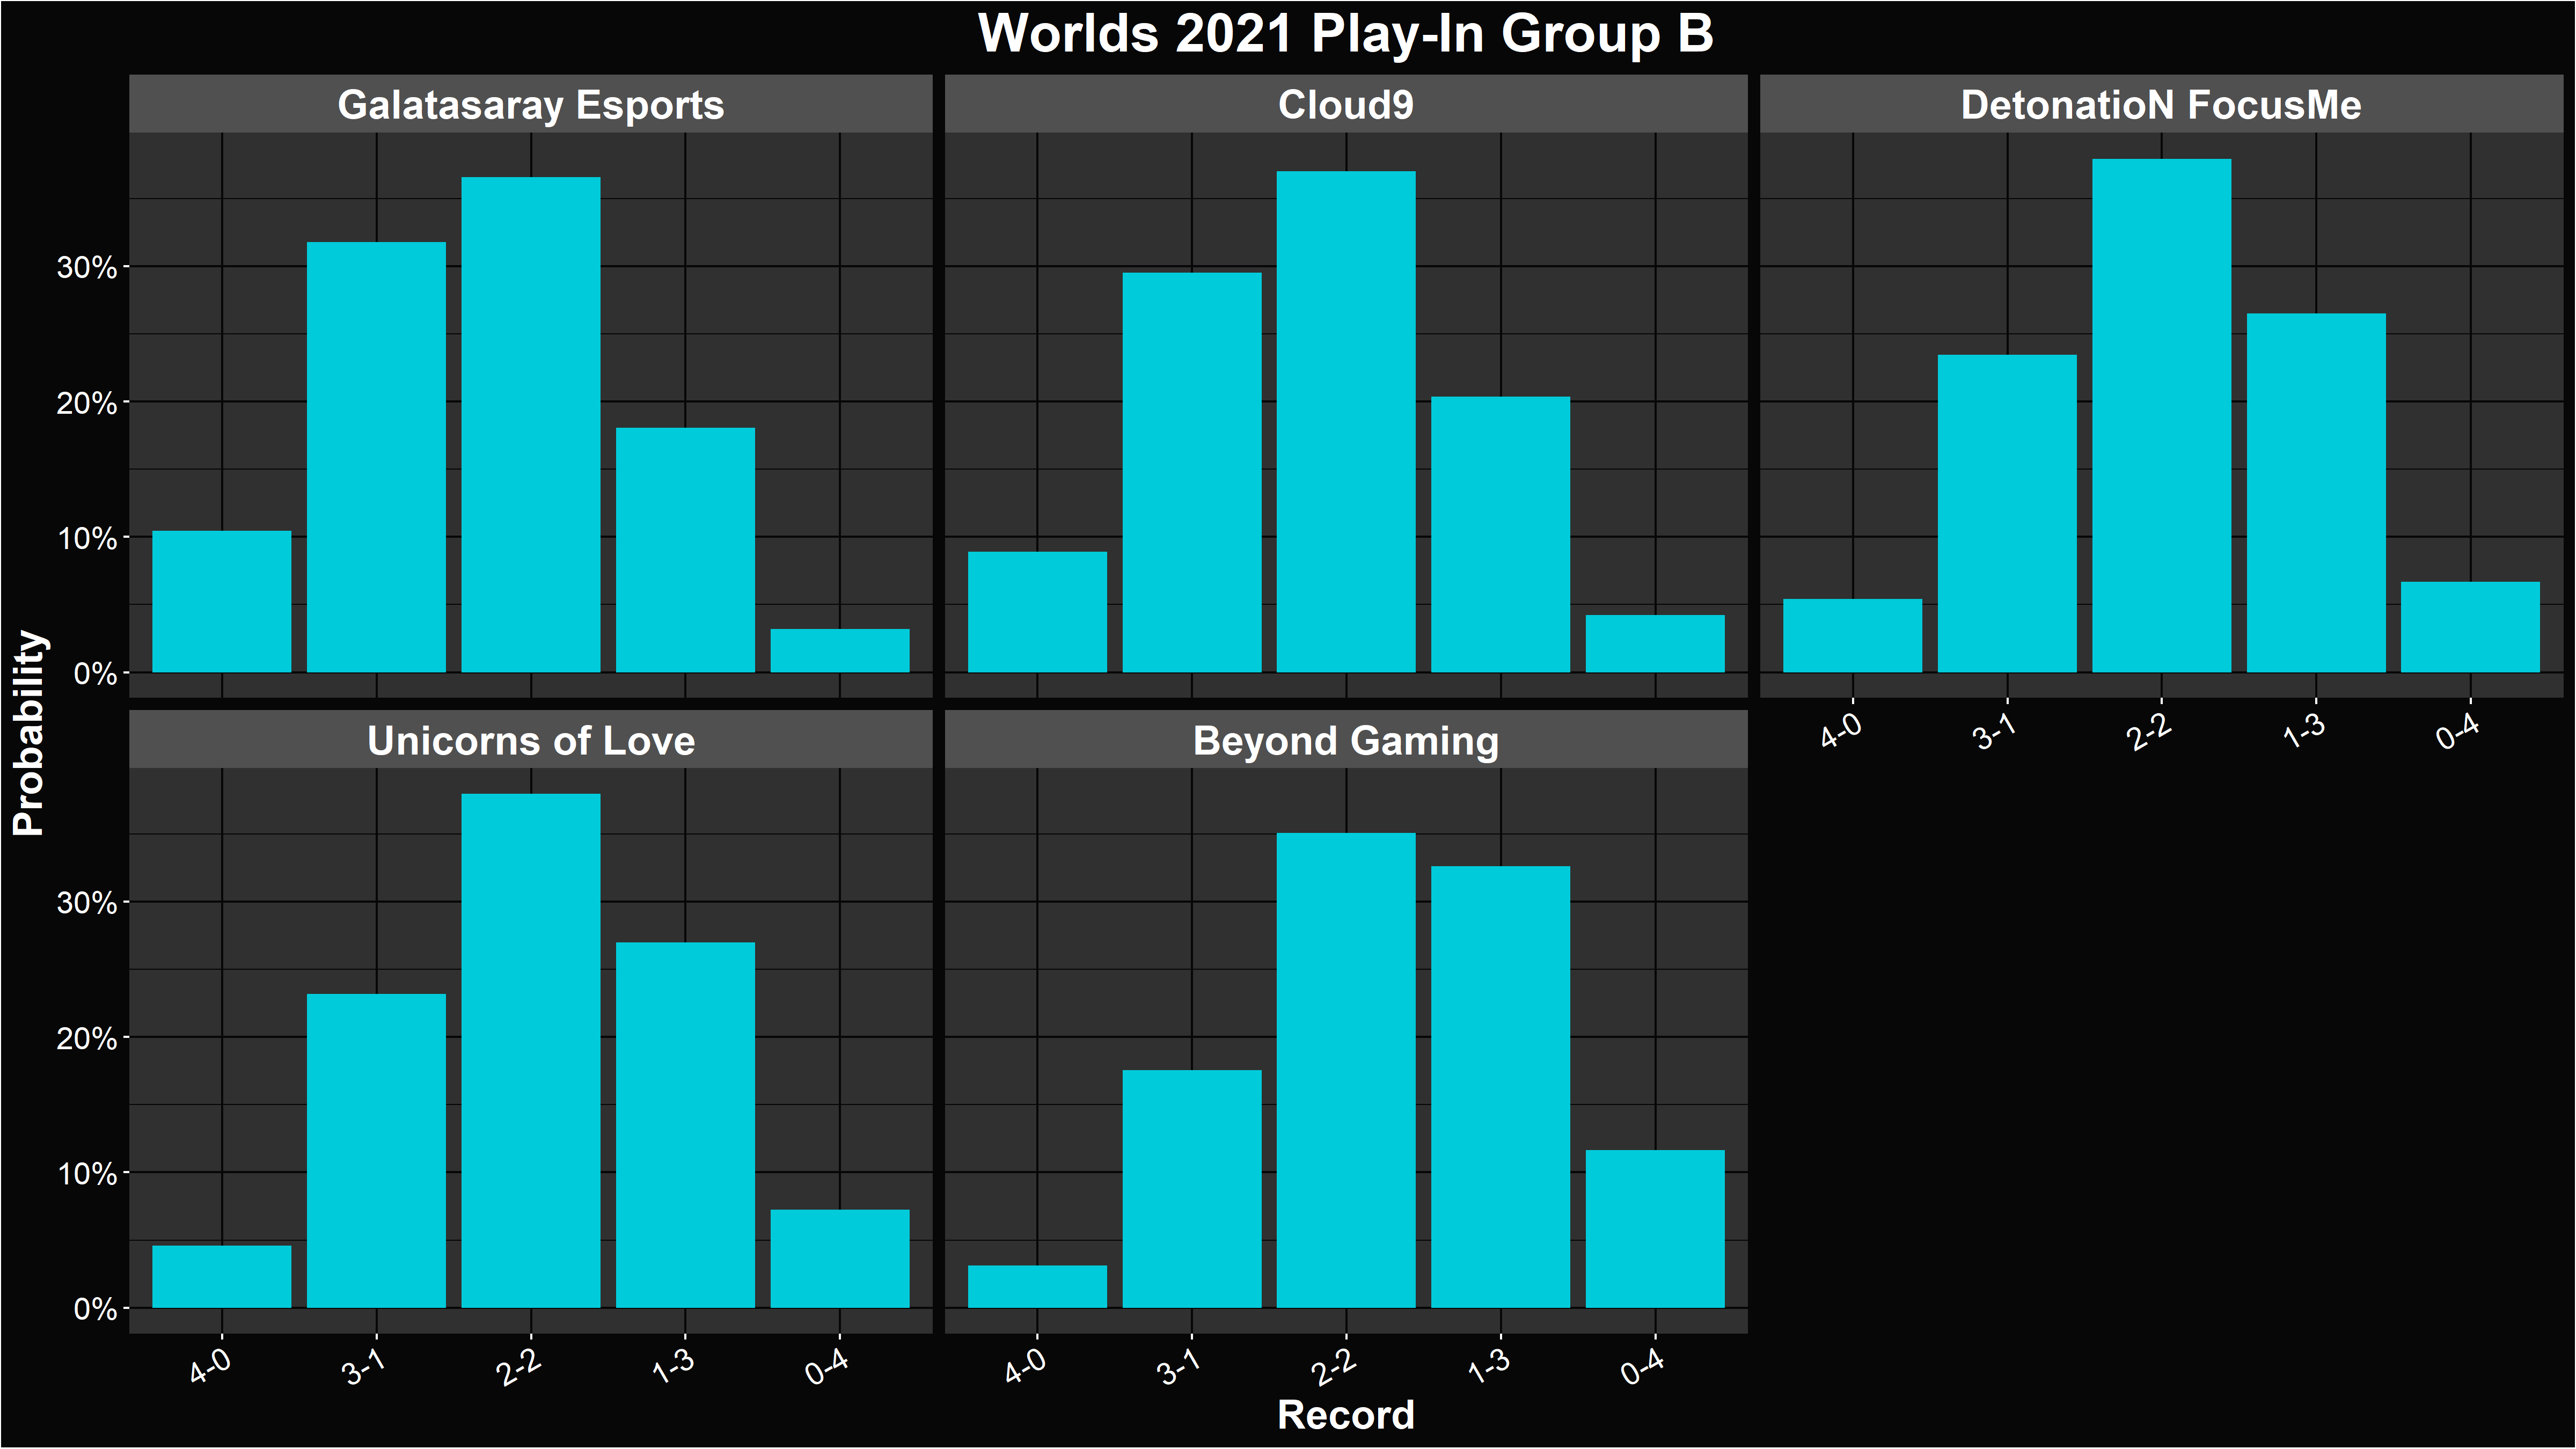 LoL Worlds 2021 Play-In Group B Record Distributions